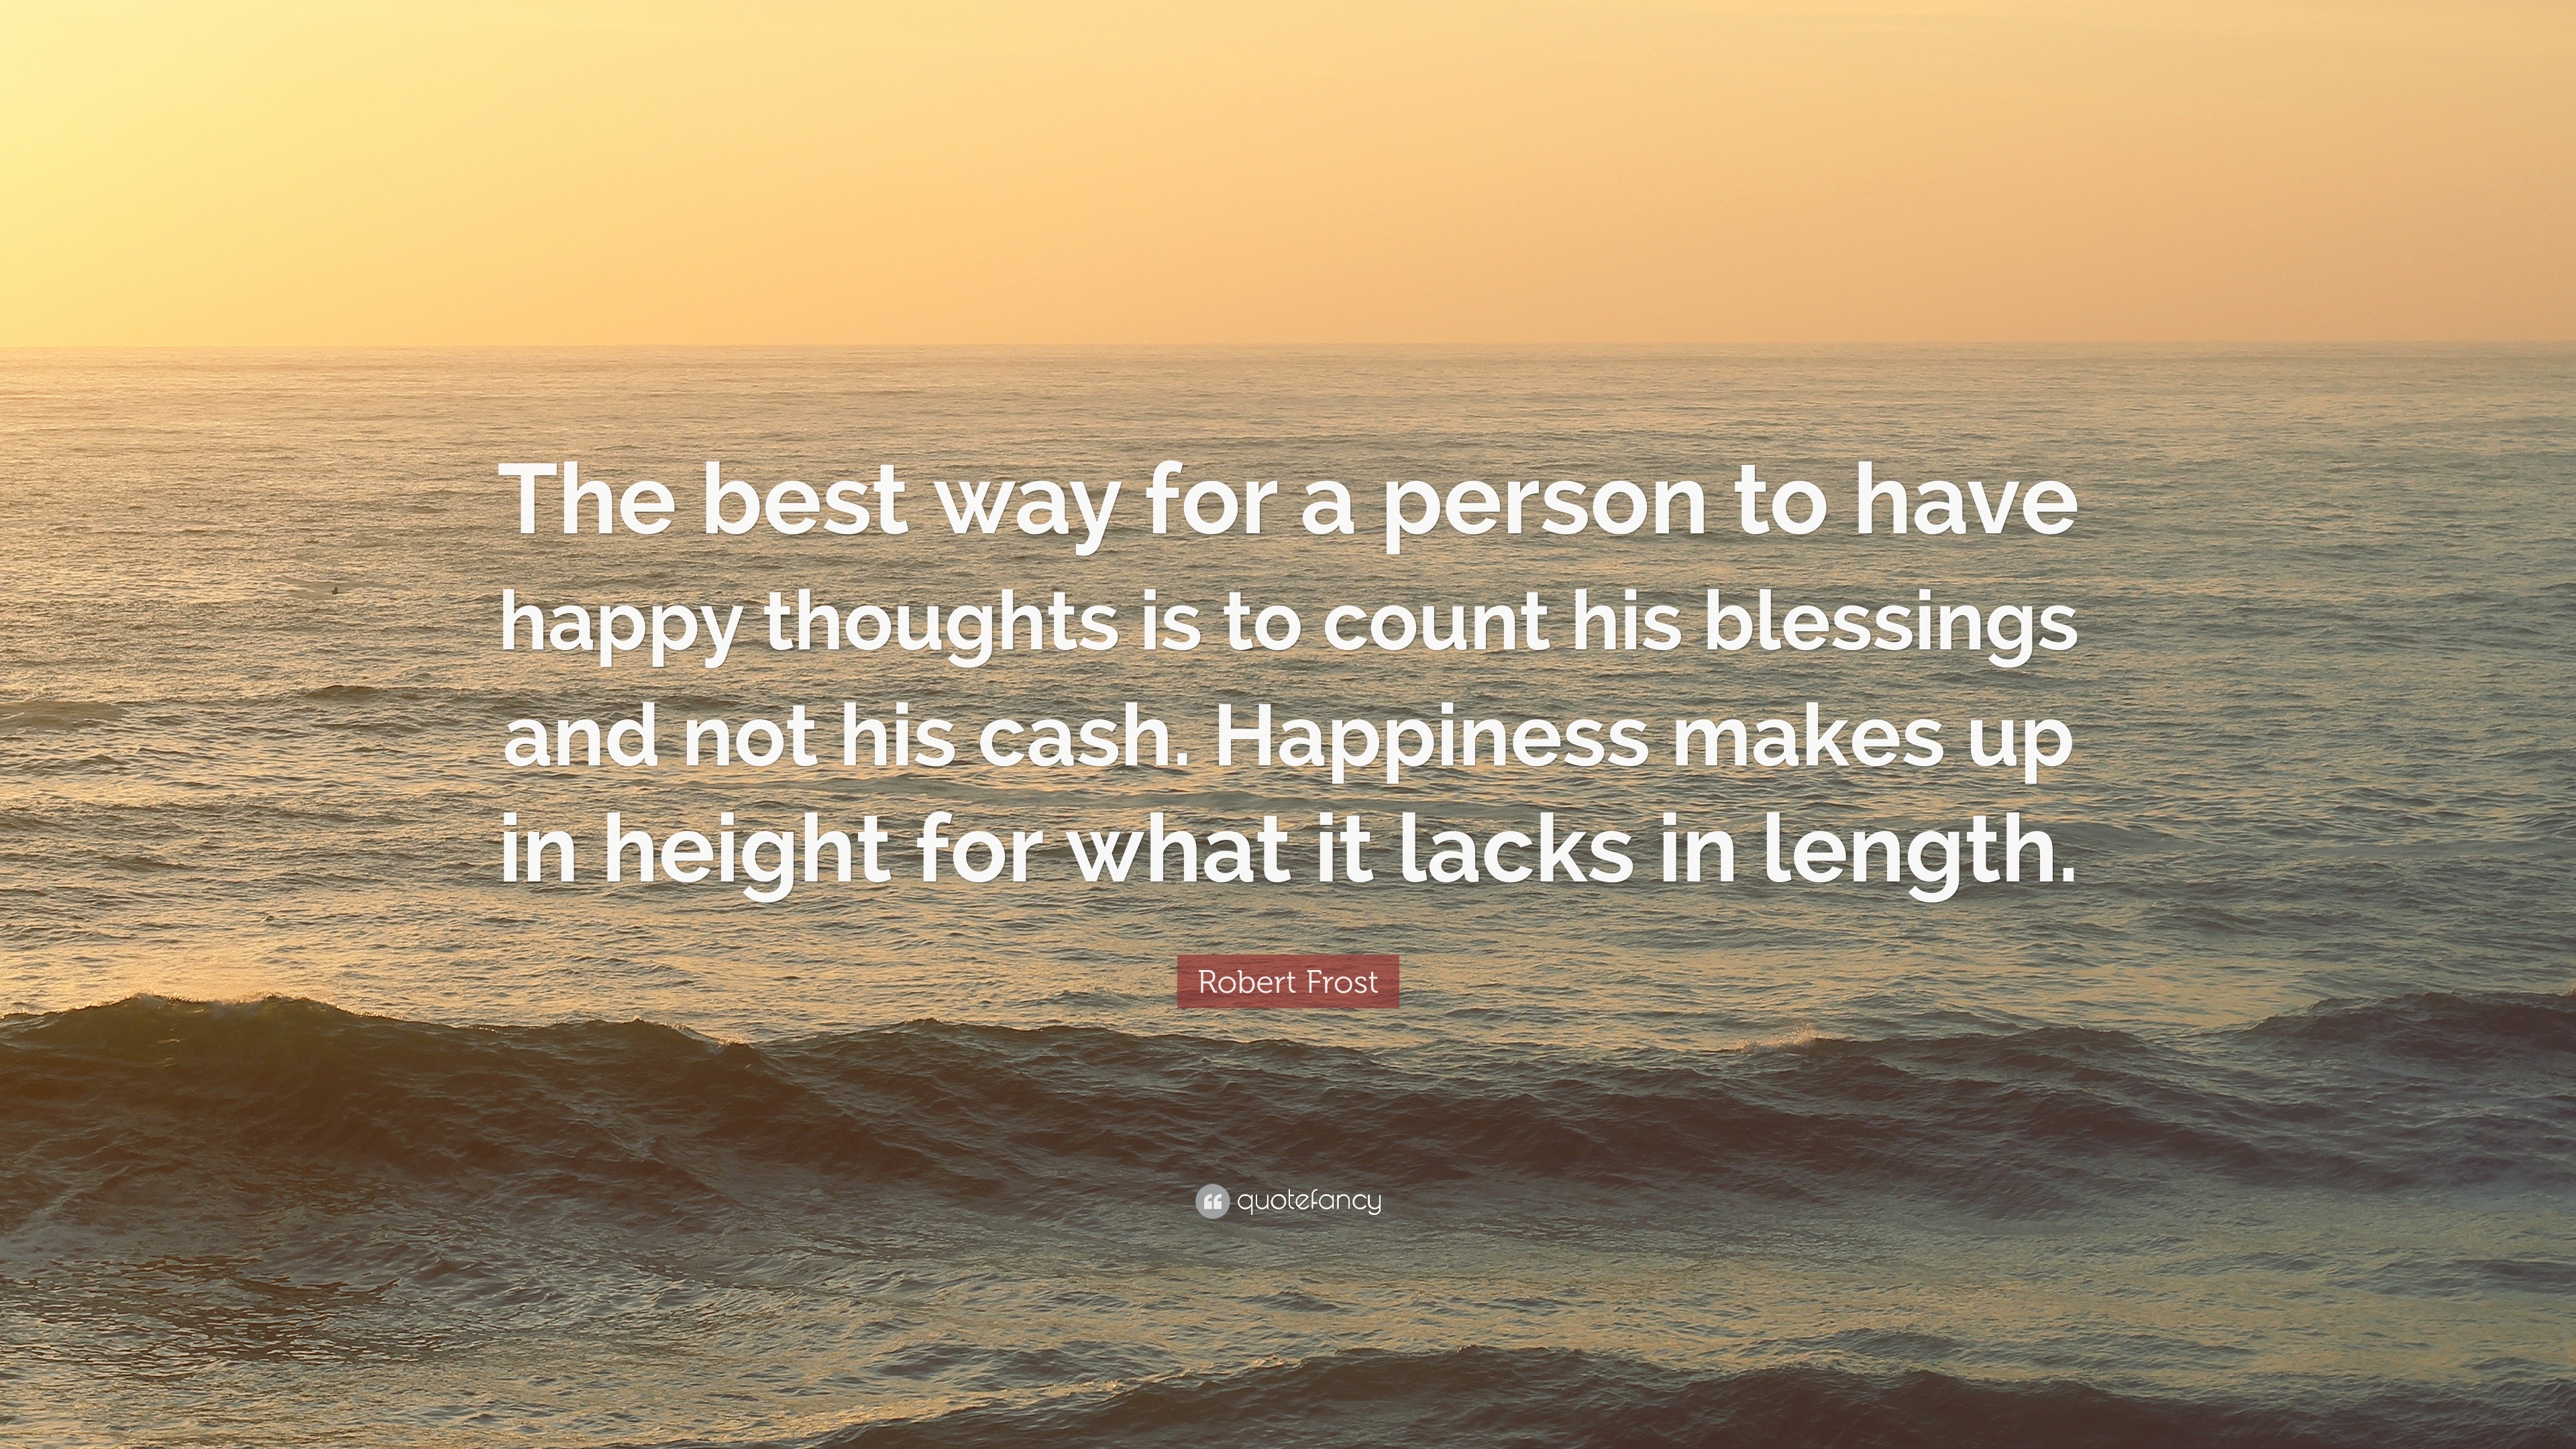 Robert Frost Quote: “The best way for a person to have happy thoughts ...